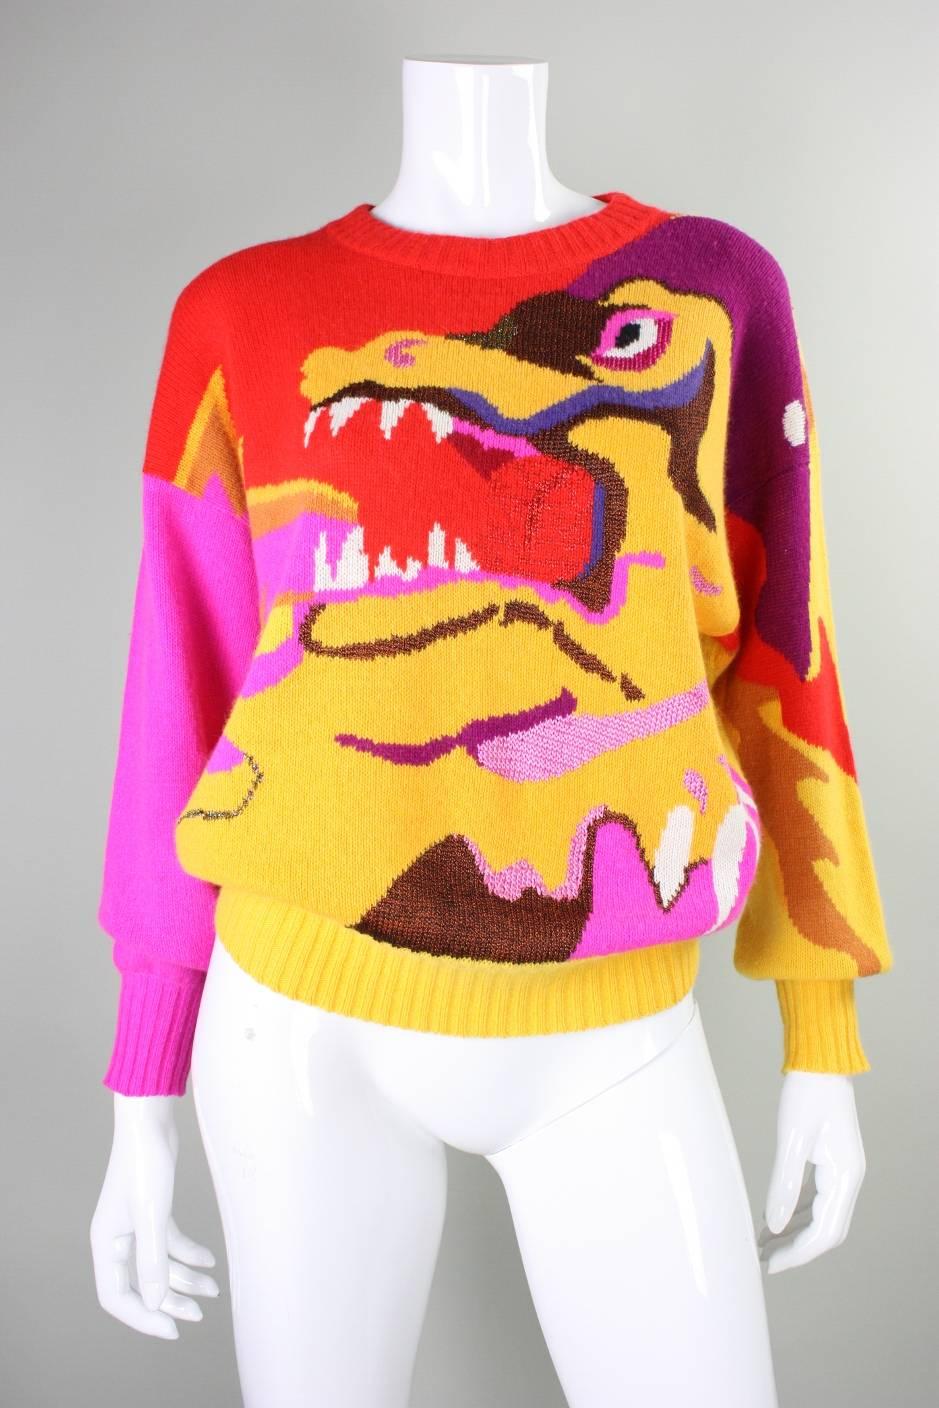 Vintage sweater from Krizia dates to the 1980's and depicts a ferocious creature who appears to be in mid-roar.  It is made of brightly-colored wool and has ribbed collar, cuffs, and waistband.  Unlined.  No closures.